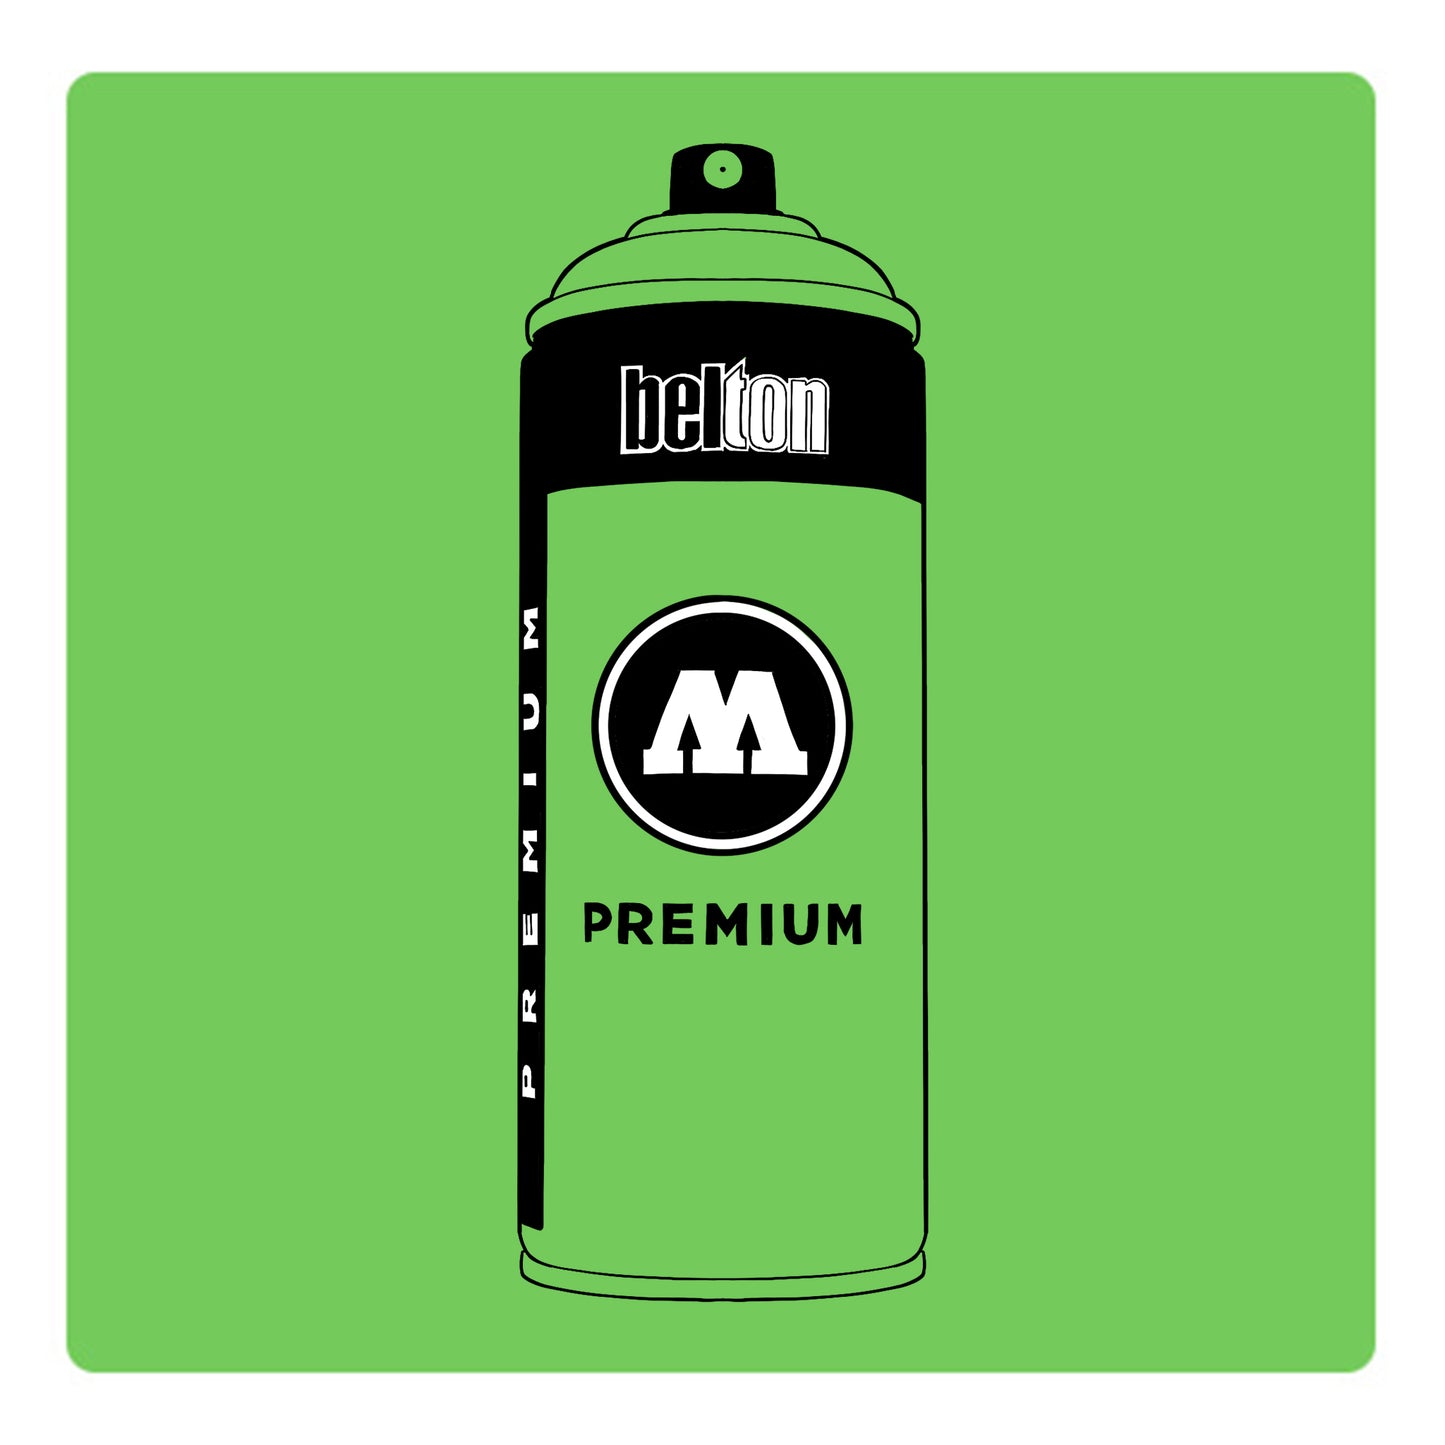 A black outline drawing of a lime green spray paint can with the words "belton","premium" and the letter"M" written on the face in black and white font. The background is a color swatch of the same lime green with a white border